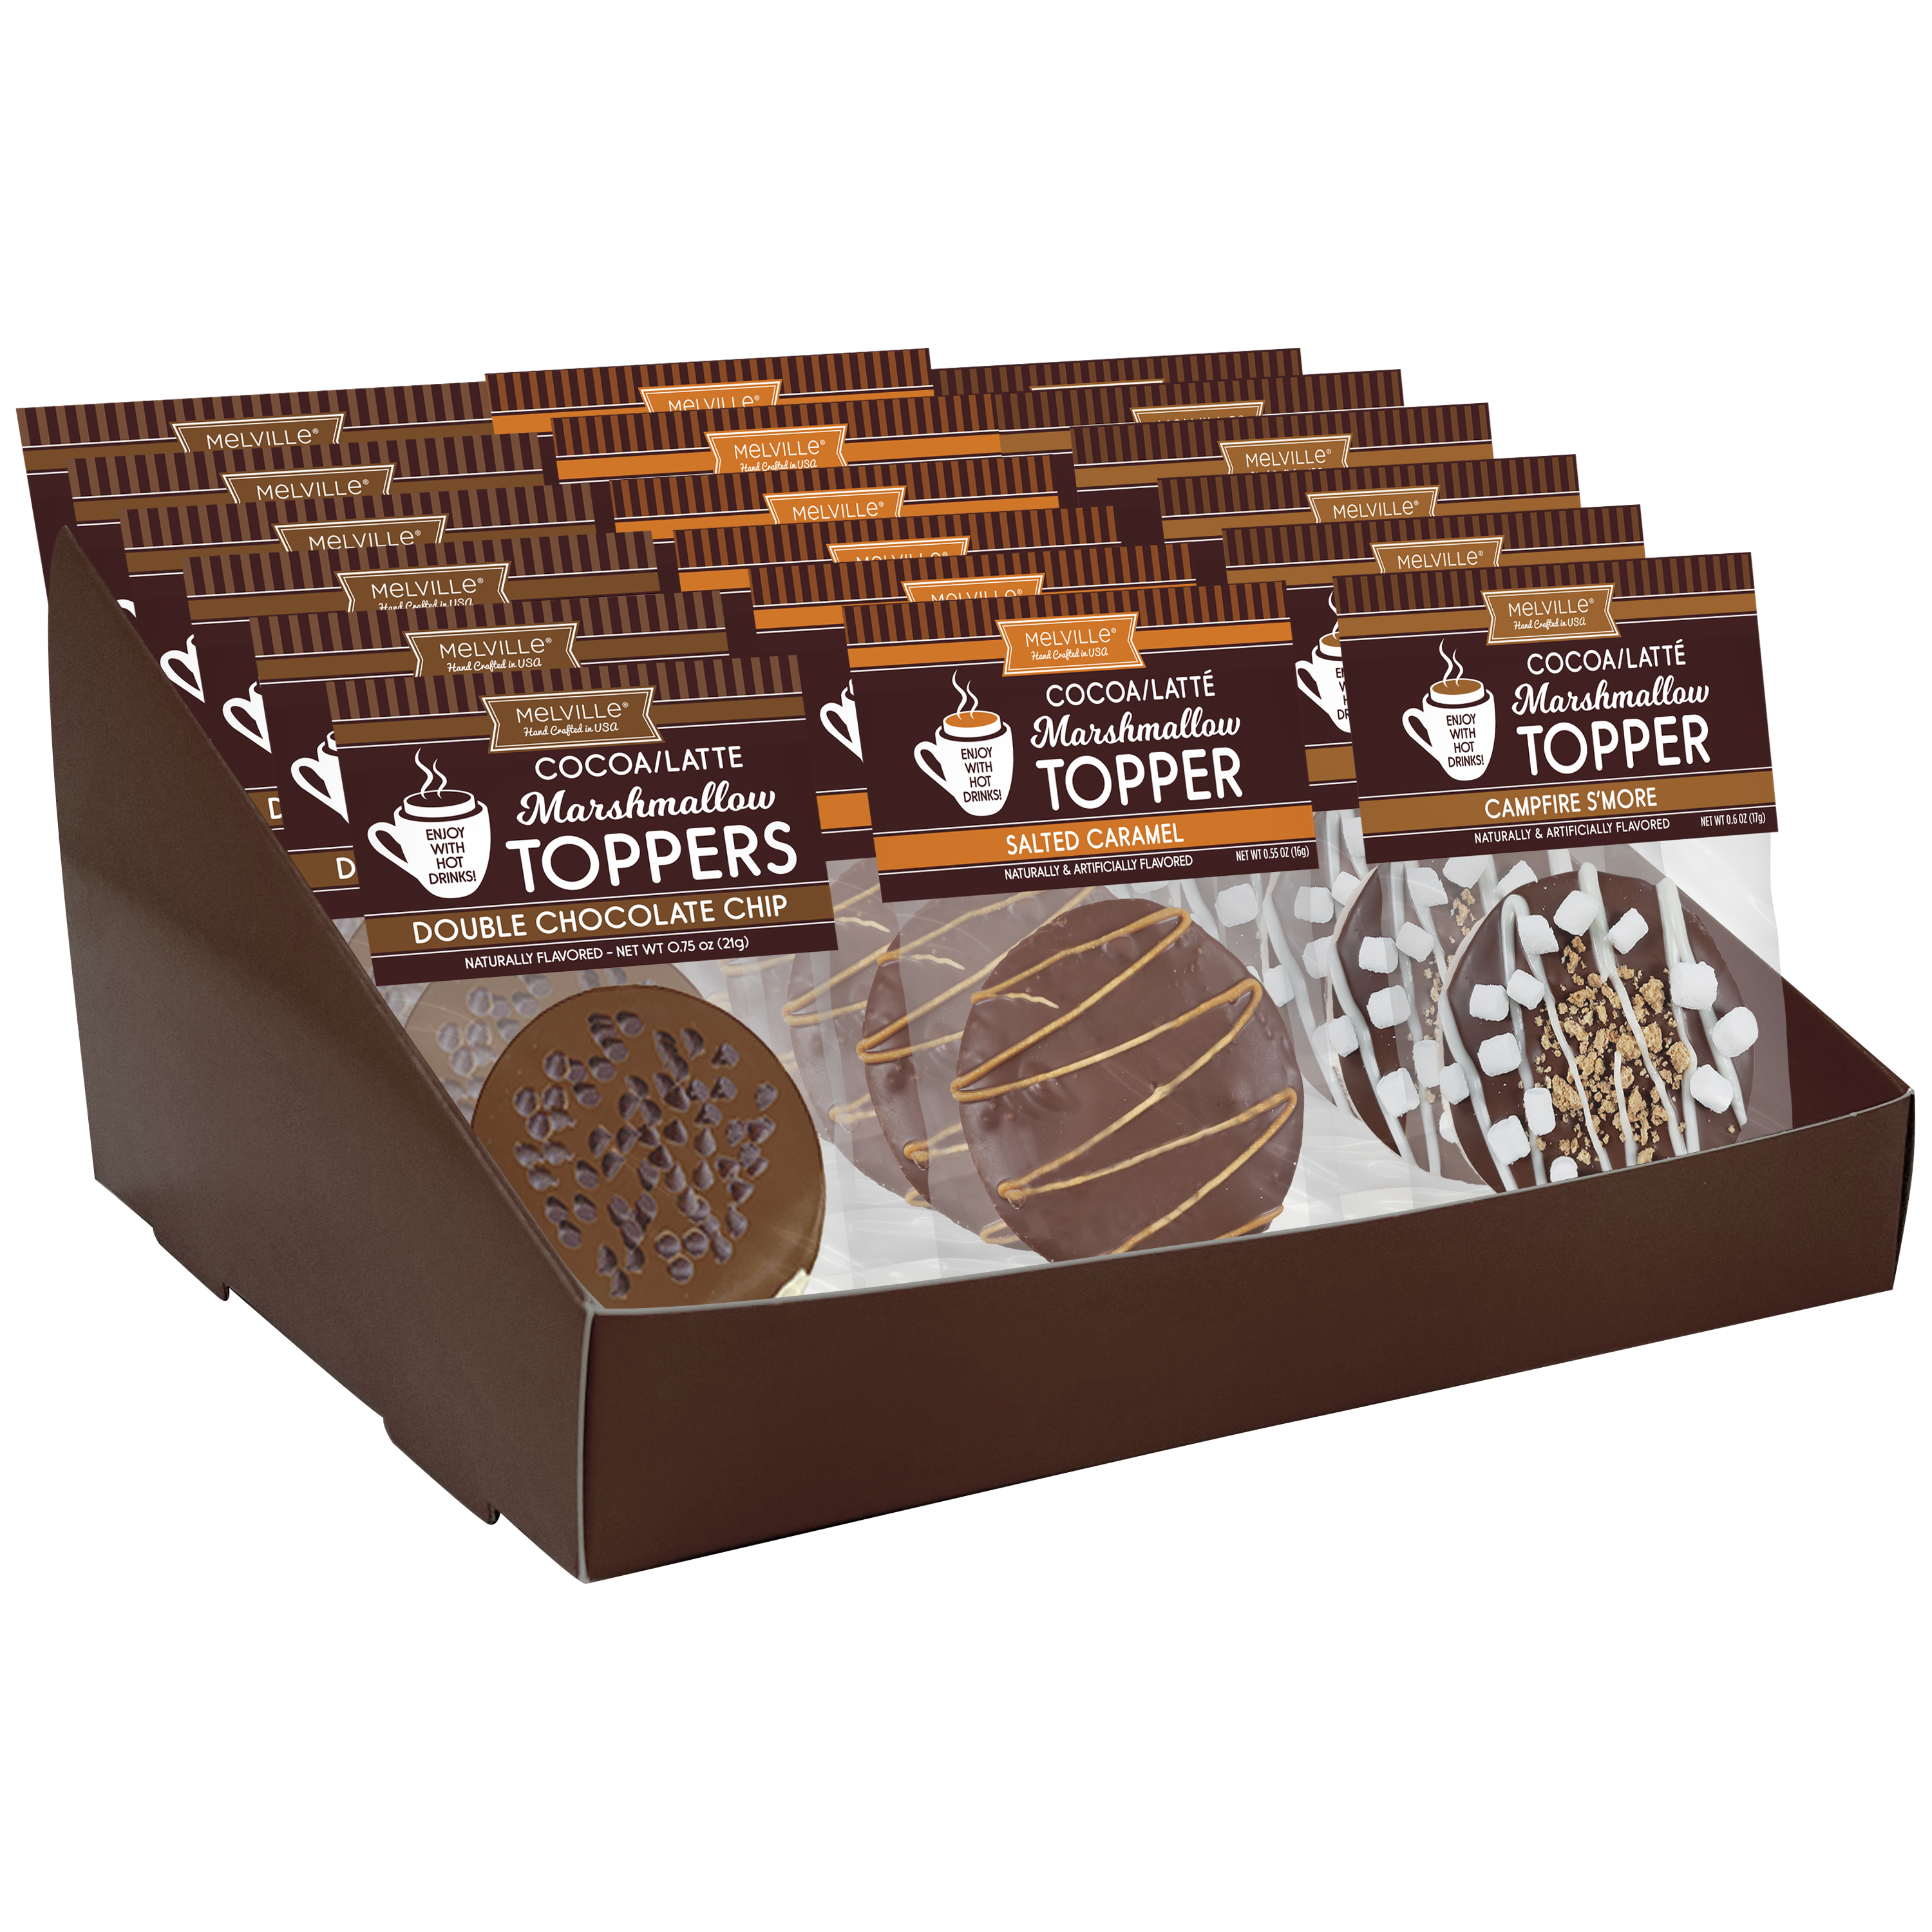 Chocolate Marshmallow Toppers - Assorted Favorites by Melville Candy Company